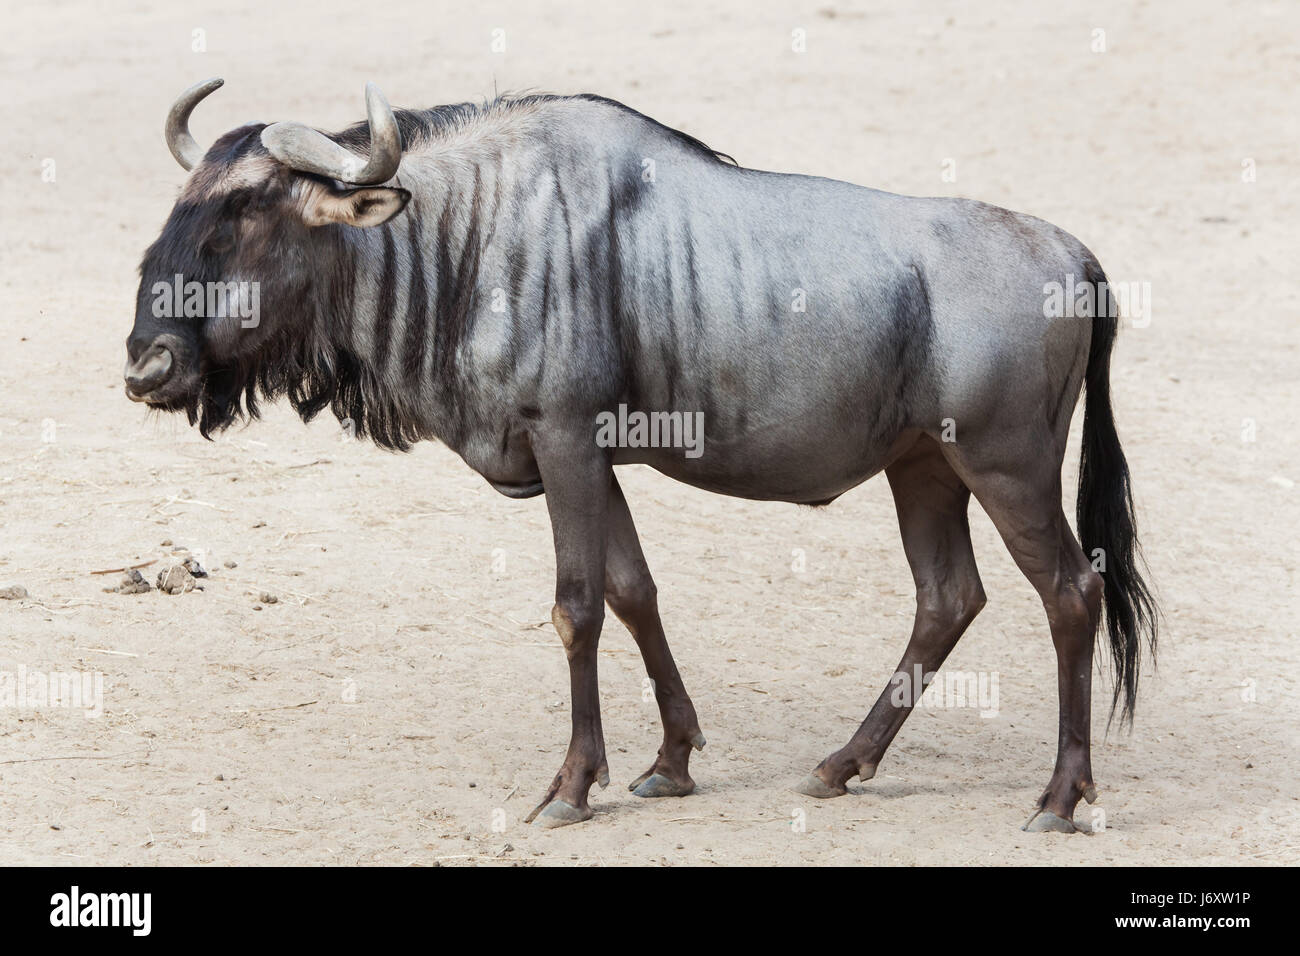 Blue wildebeest (Connochaetes taurinus), also known as the brindled gnu. Stock Photo